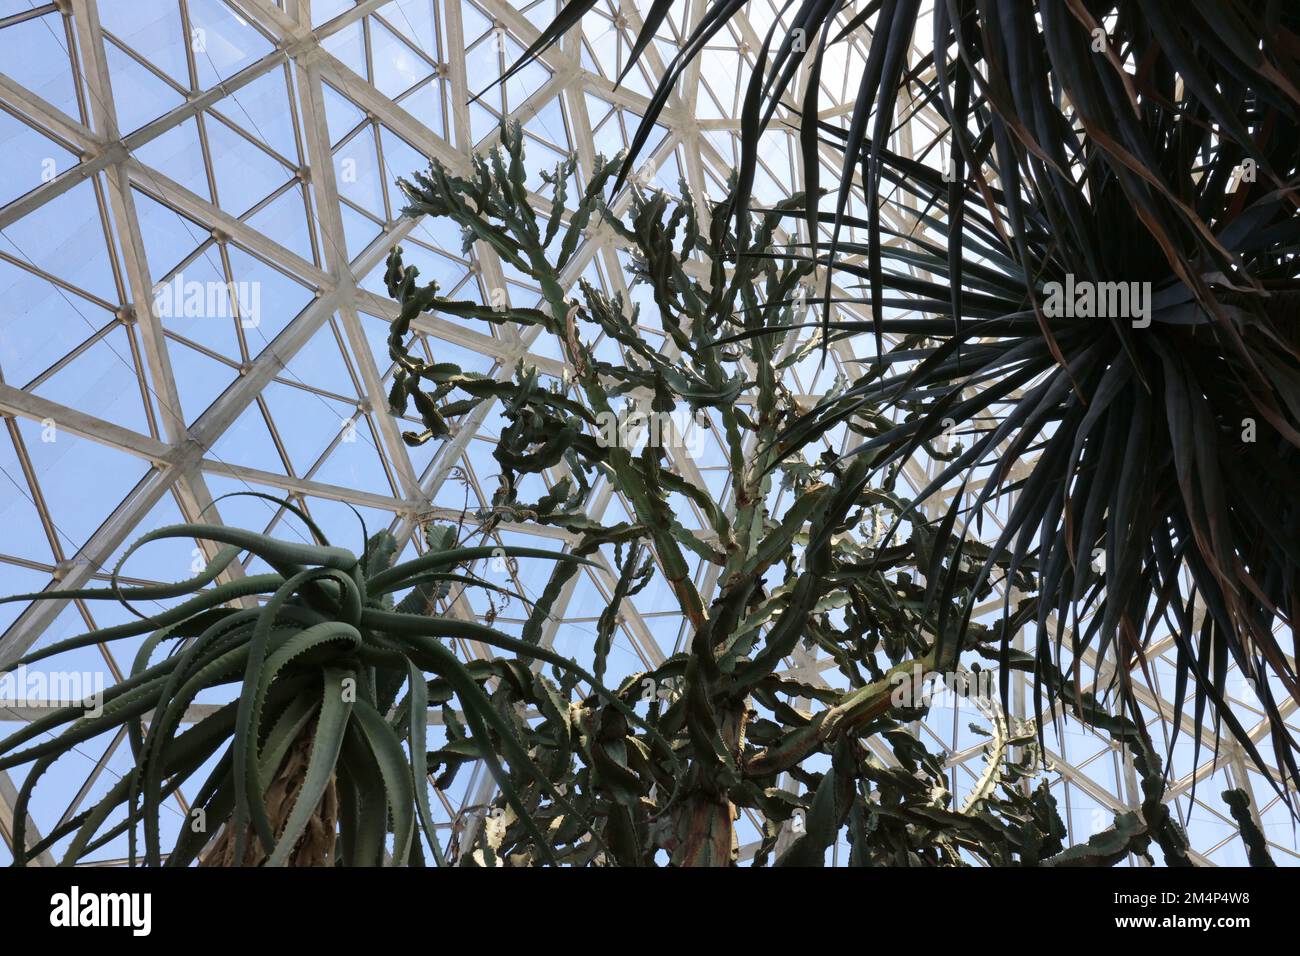 Looking up at a towering Aloe tree, Yucca and cactus in the desert show room at the Mitchell Park Conservatory, The Domes, in Milwaukee, Wisconsin, US Stock Photo